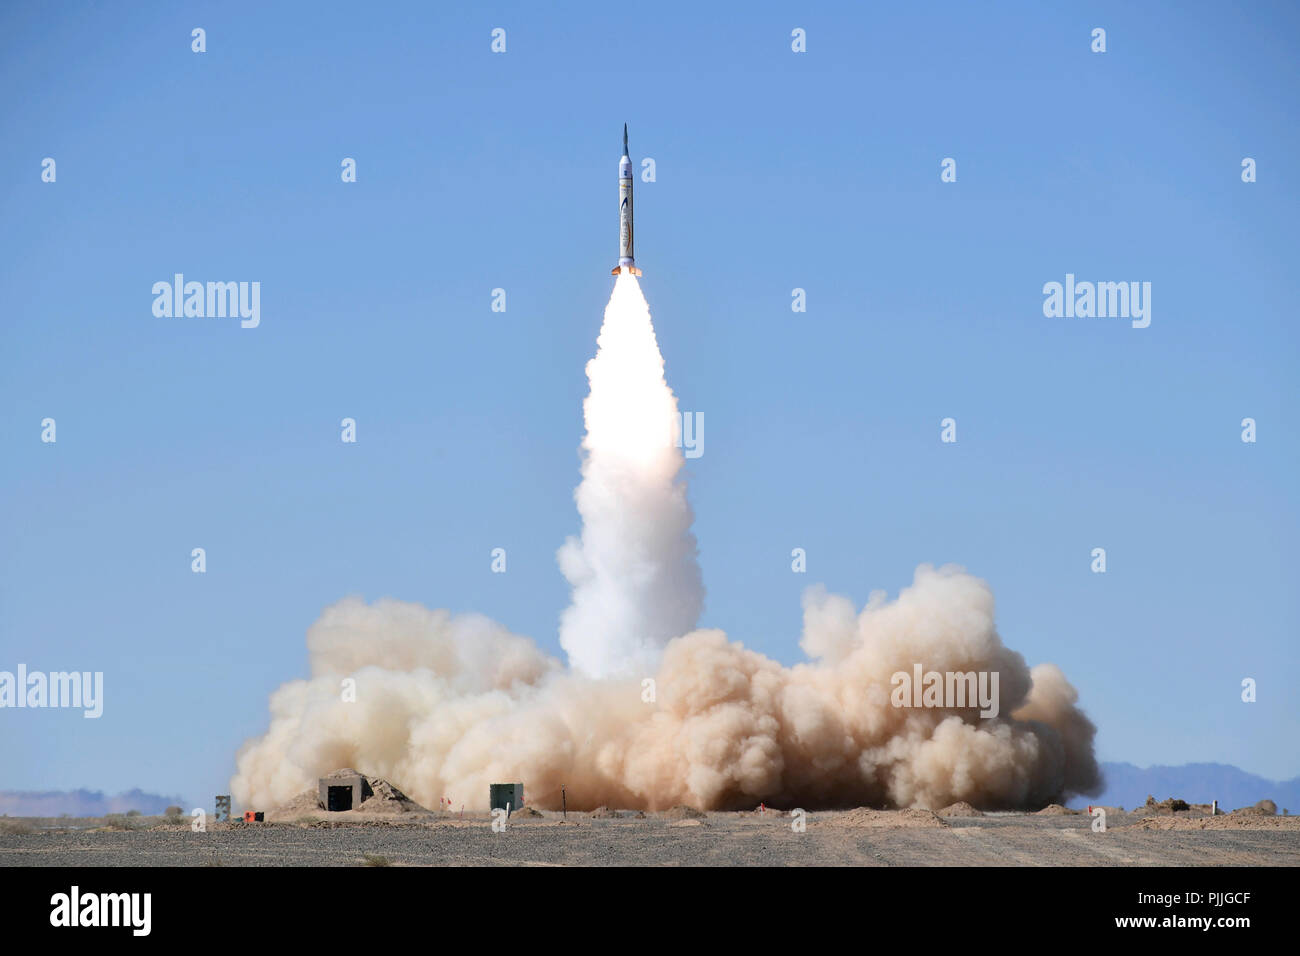 Jiuquan, Jiuquan Satellite Launch Center in northwest China. 7th Sep, 2018. The OS-X1, a suborbital rocket developed and produced by Chinese private company One Space, is successfully launched from the Jiuquan Satellite Launch Center in northwest China, Sept. 7, 2018. The OS-X1 can reach a speed of Mach 4.5 in load flight. This was the company's second launch this year. Credit: Wang Jiangbo/Xinhua/Alamy Live News Stock Photo